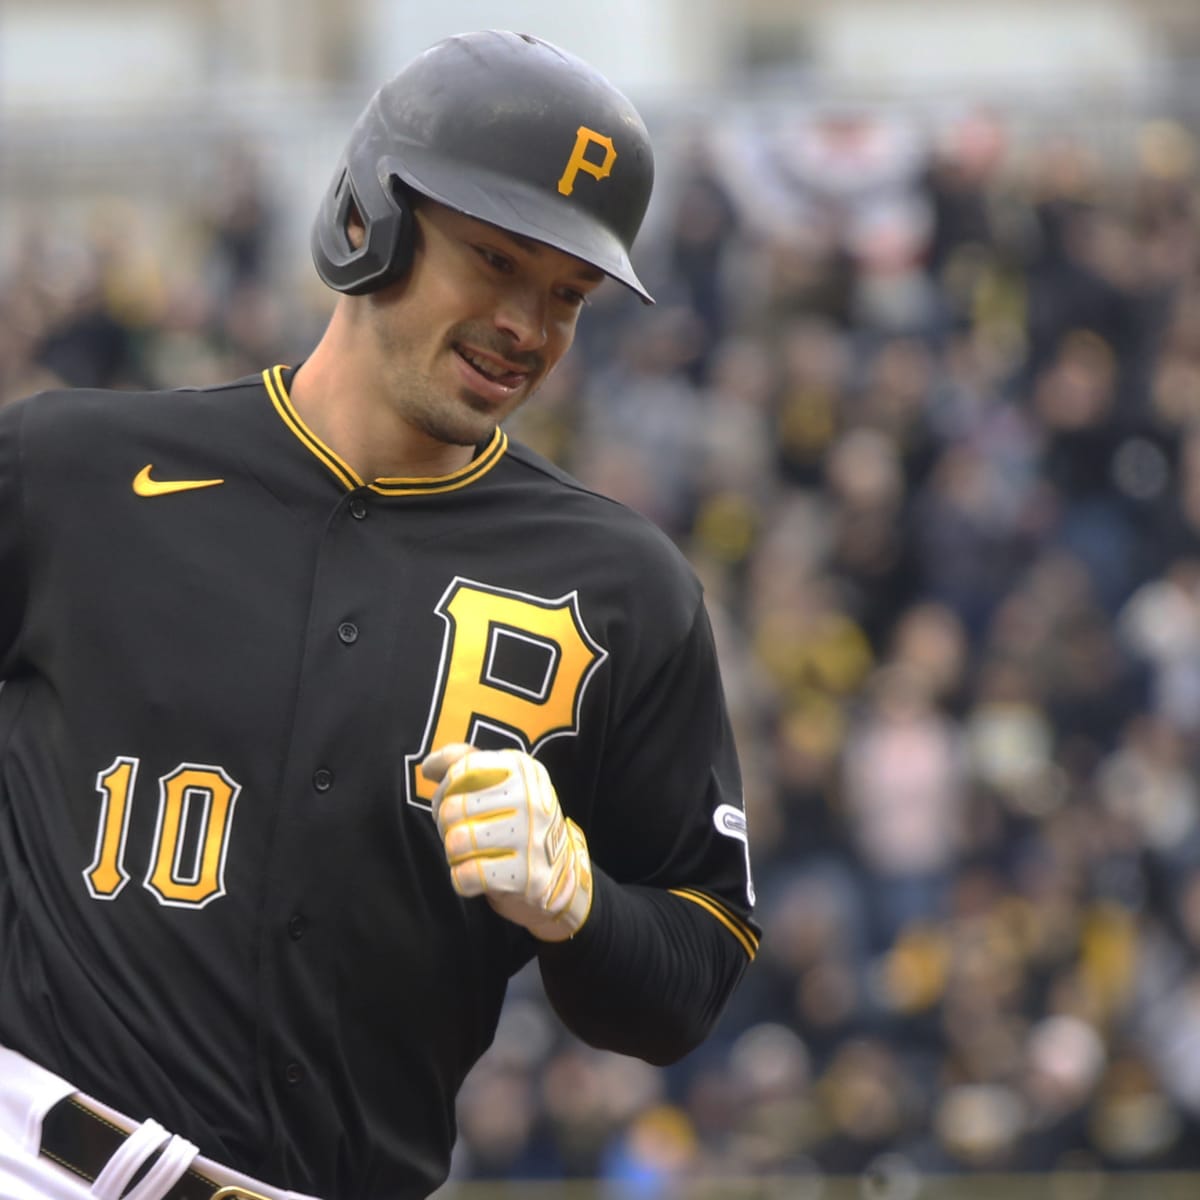 Bryan Reynolds contract: Pirates sign outfielder to record